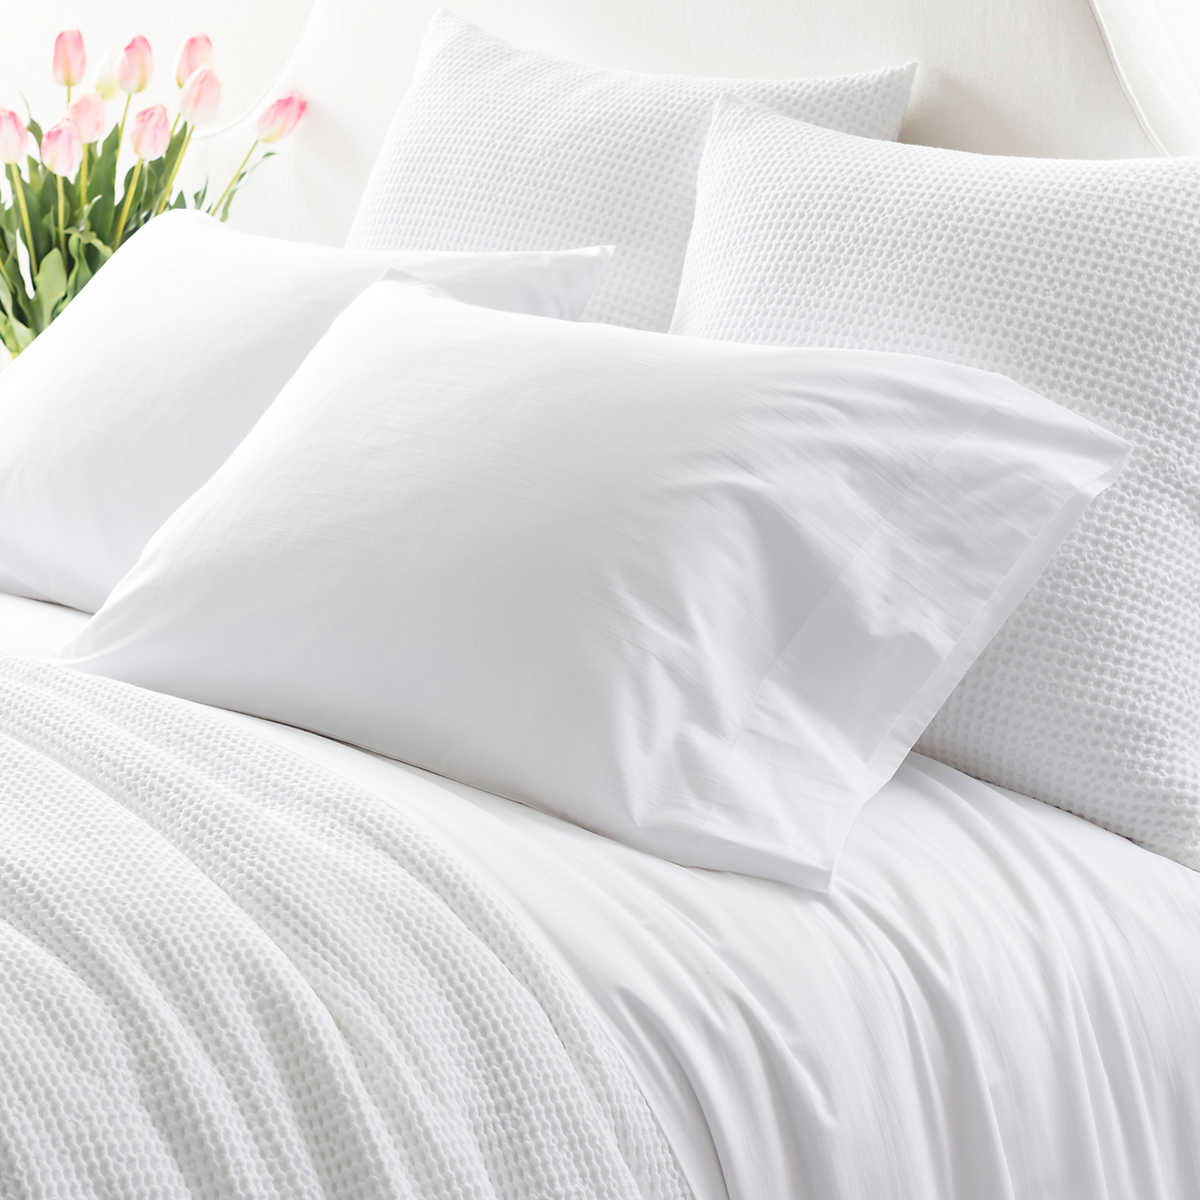 Essential Percale White Sheet Set Bedding 